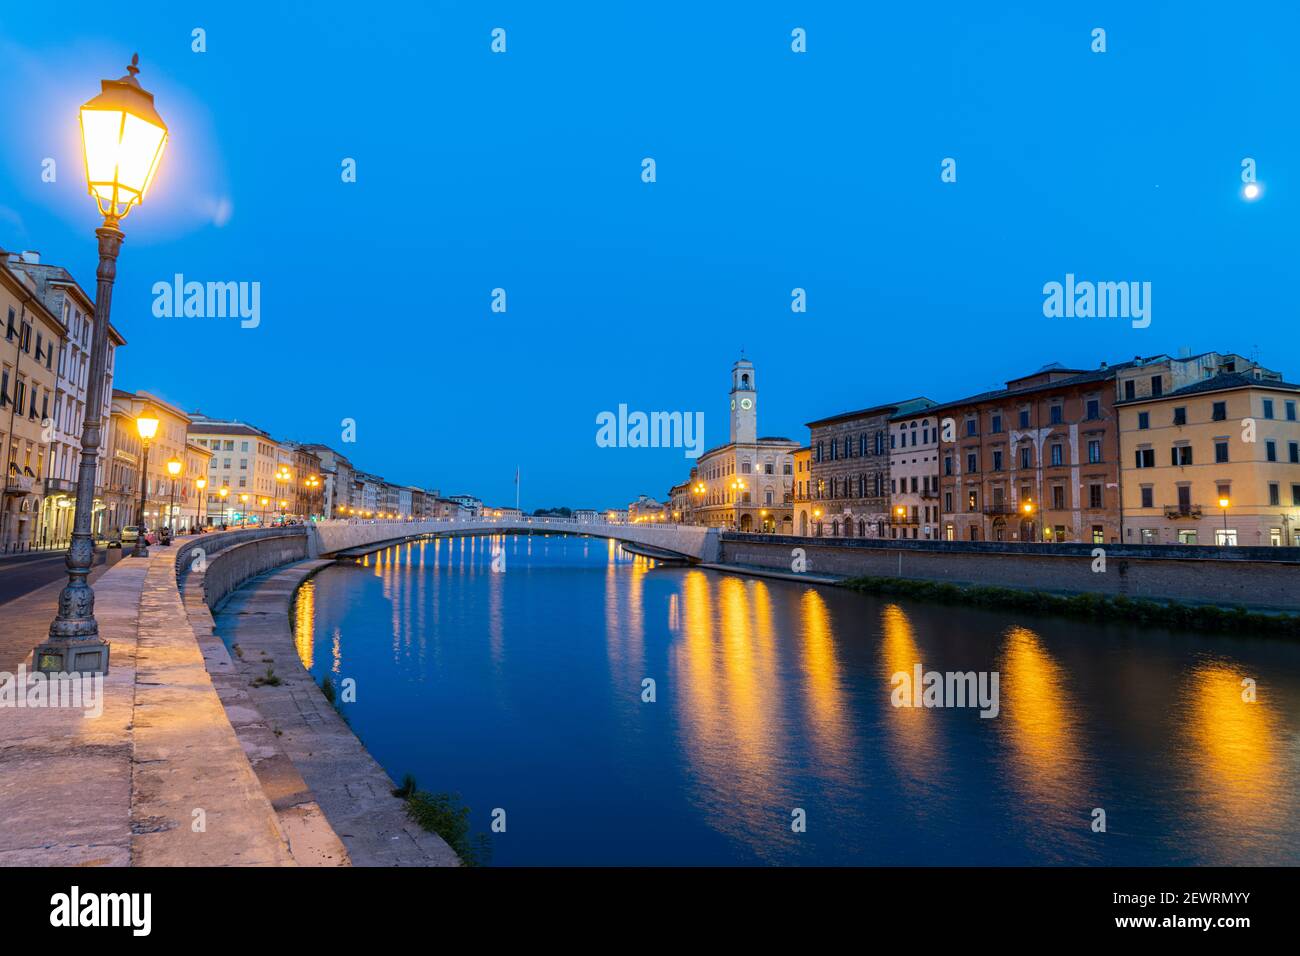 Old lanterns and buildings at dusk with Ponte di Mezzo bridge on banks of Arno river, Lungarno, Pisa, Tuscany, Italy, Europe Stock Photo